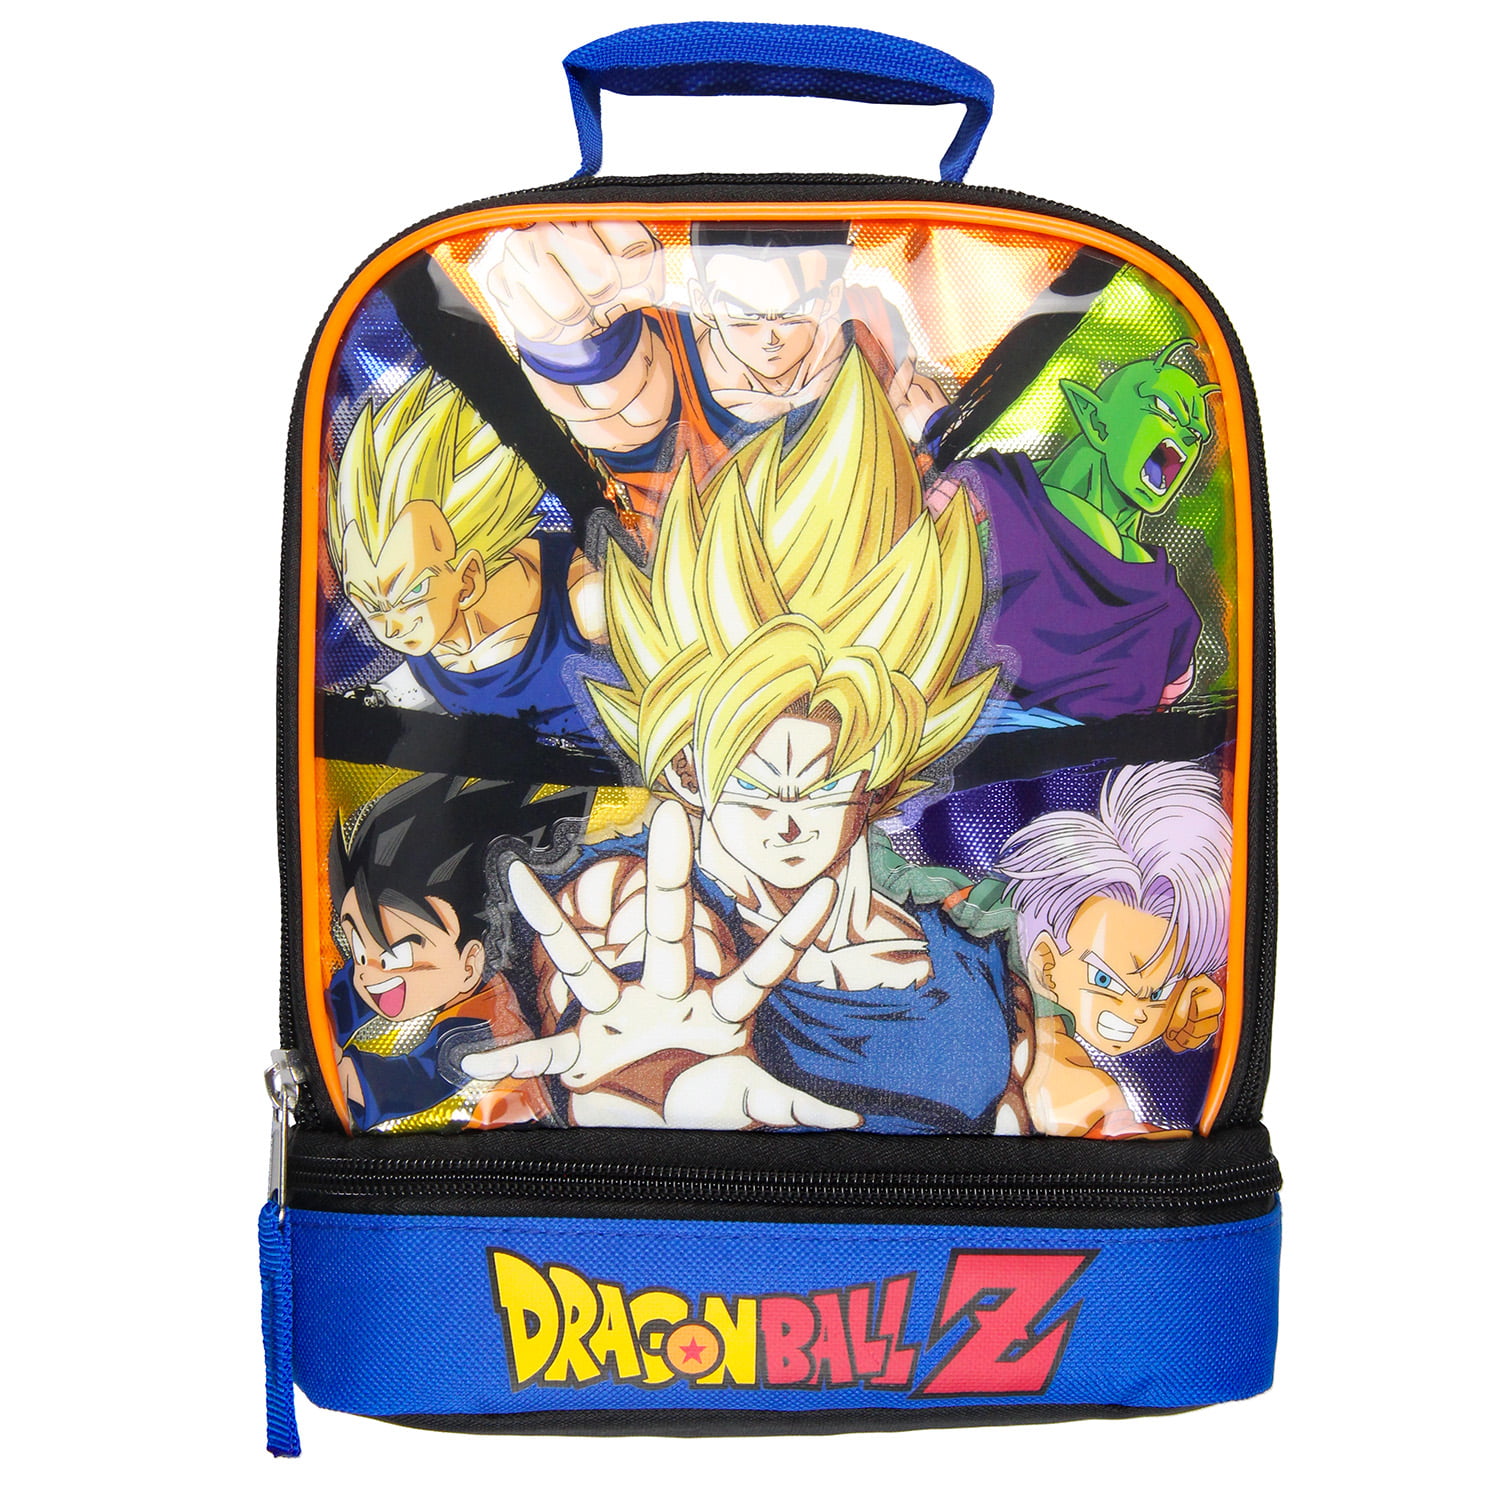 Dragon Ball Z Lunch Box Dual Compartment Insulated Lunch Bag Tote -  